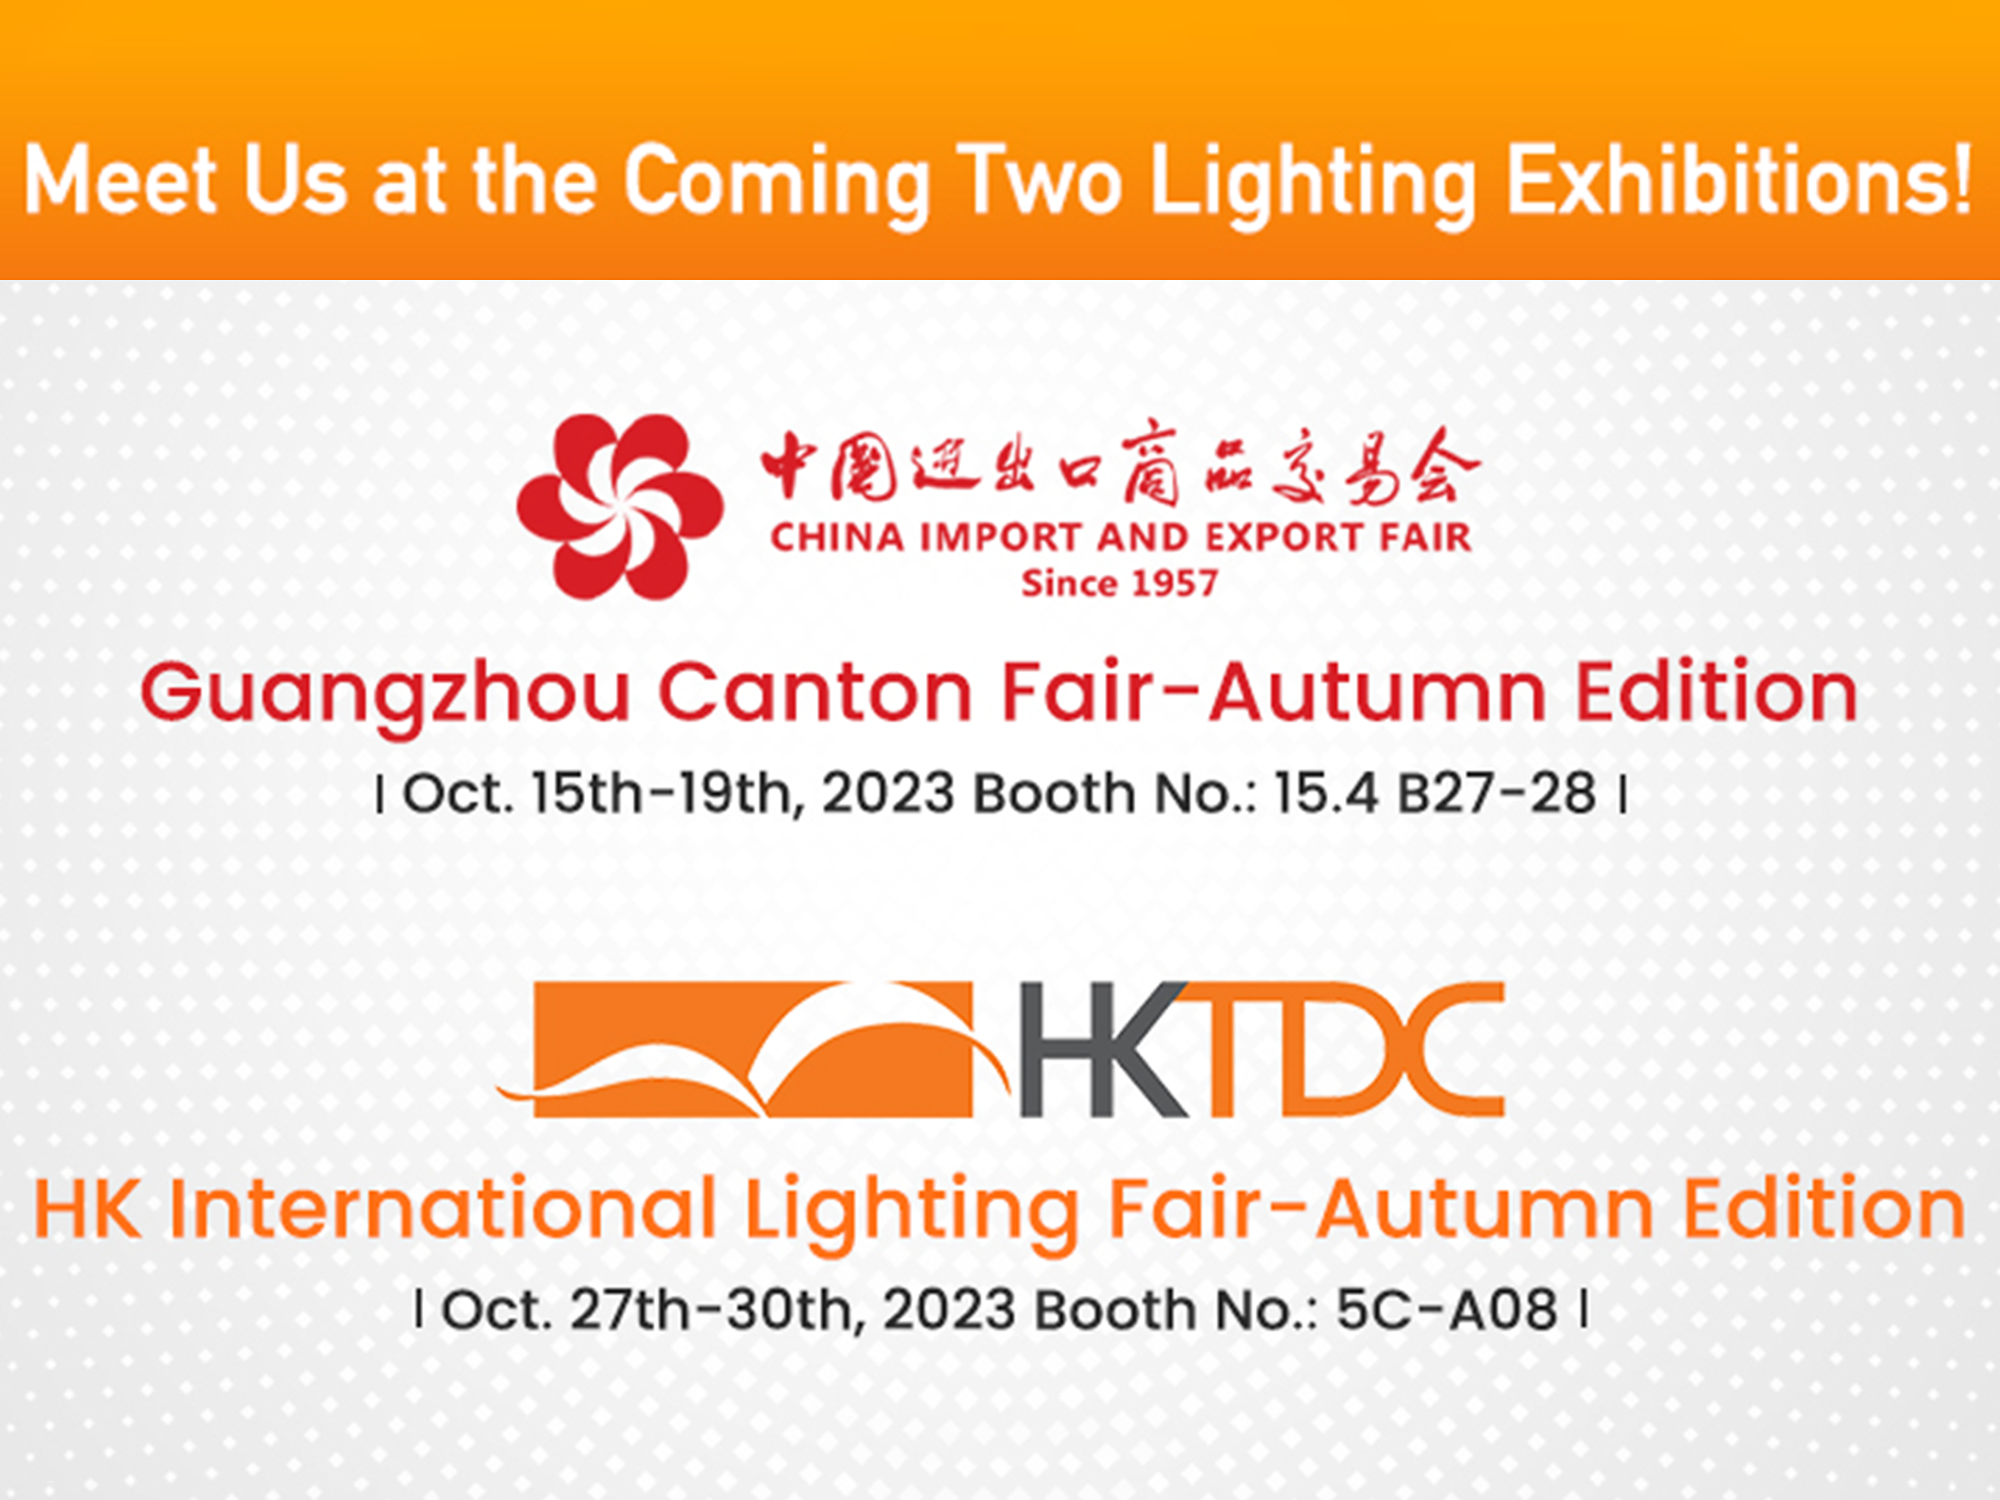 Meet You at the Coming Two Lighting Exhibitions!